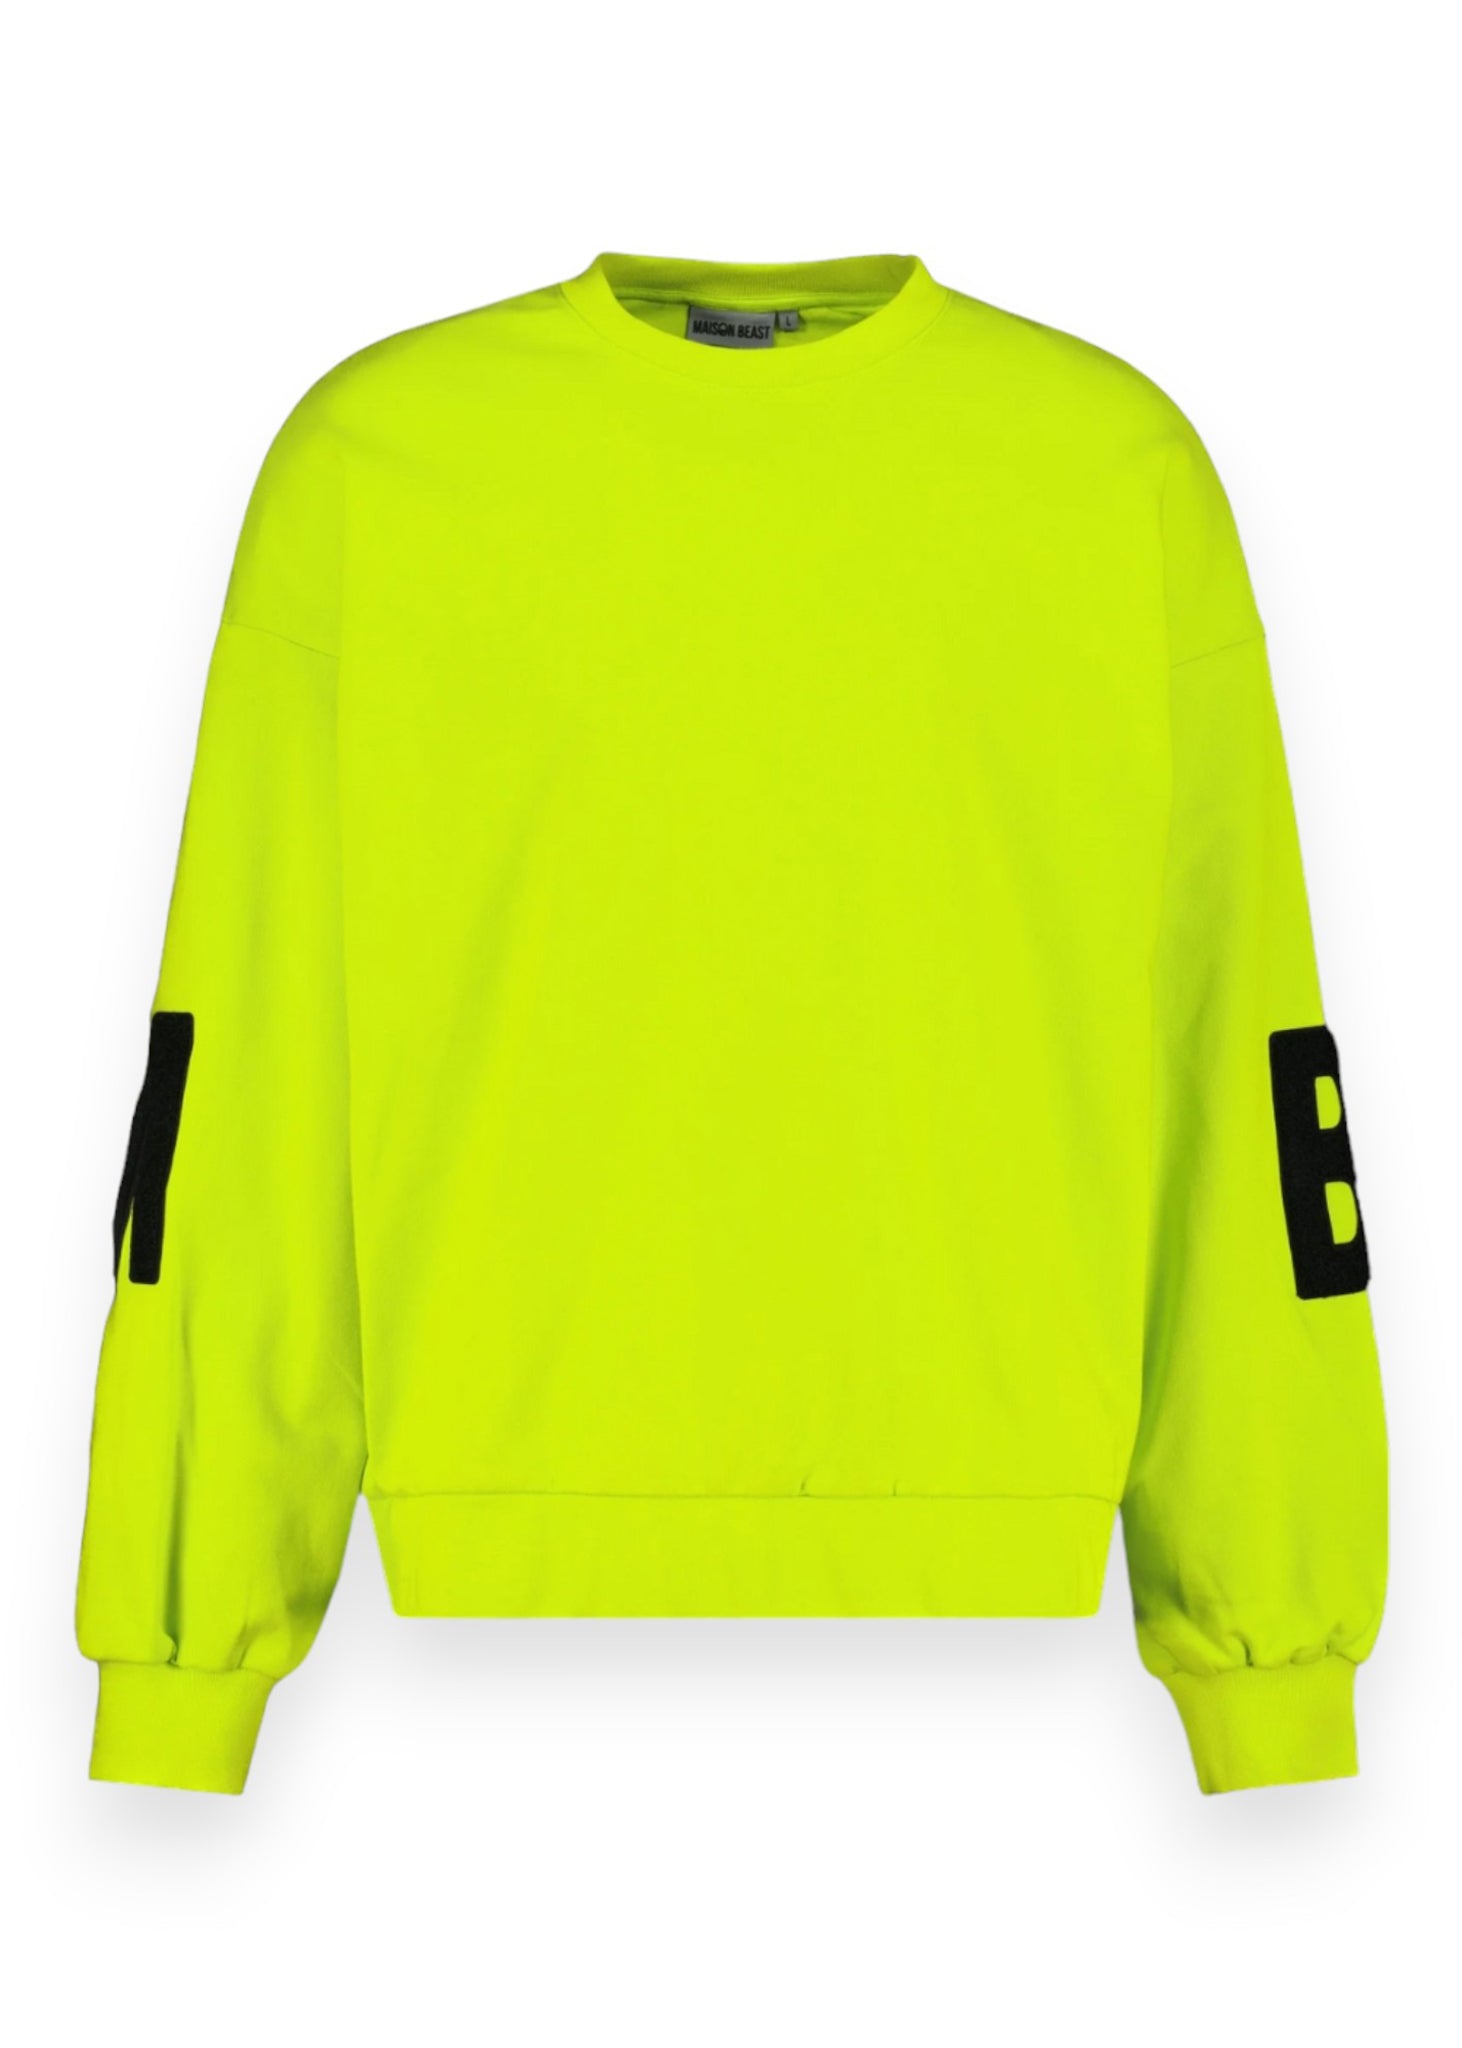 ICONIC MB CREWNECK - LIME PUNCH